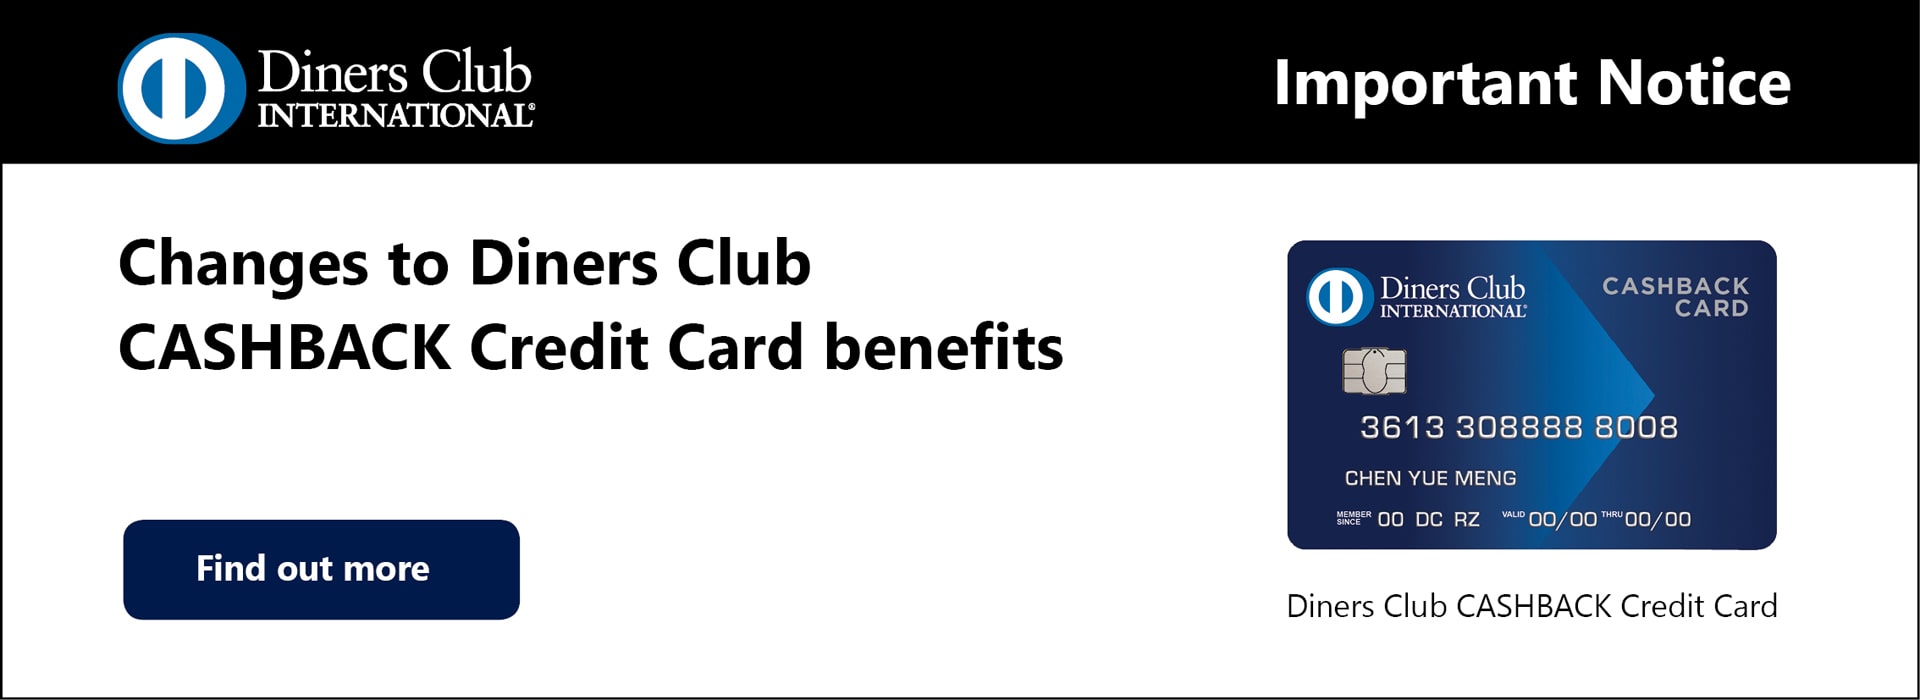 Changes to Diners Club CASHBACK Credit Card benefits